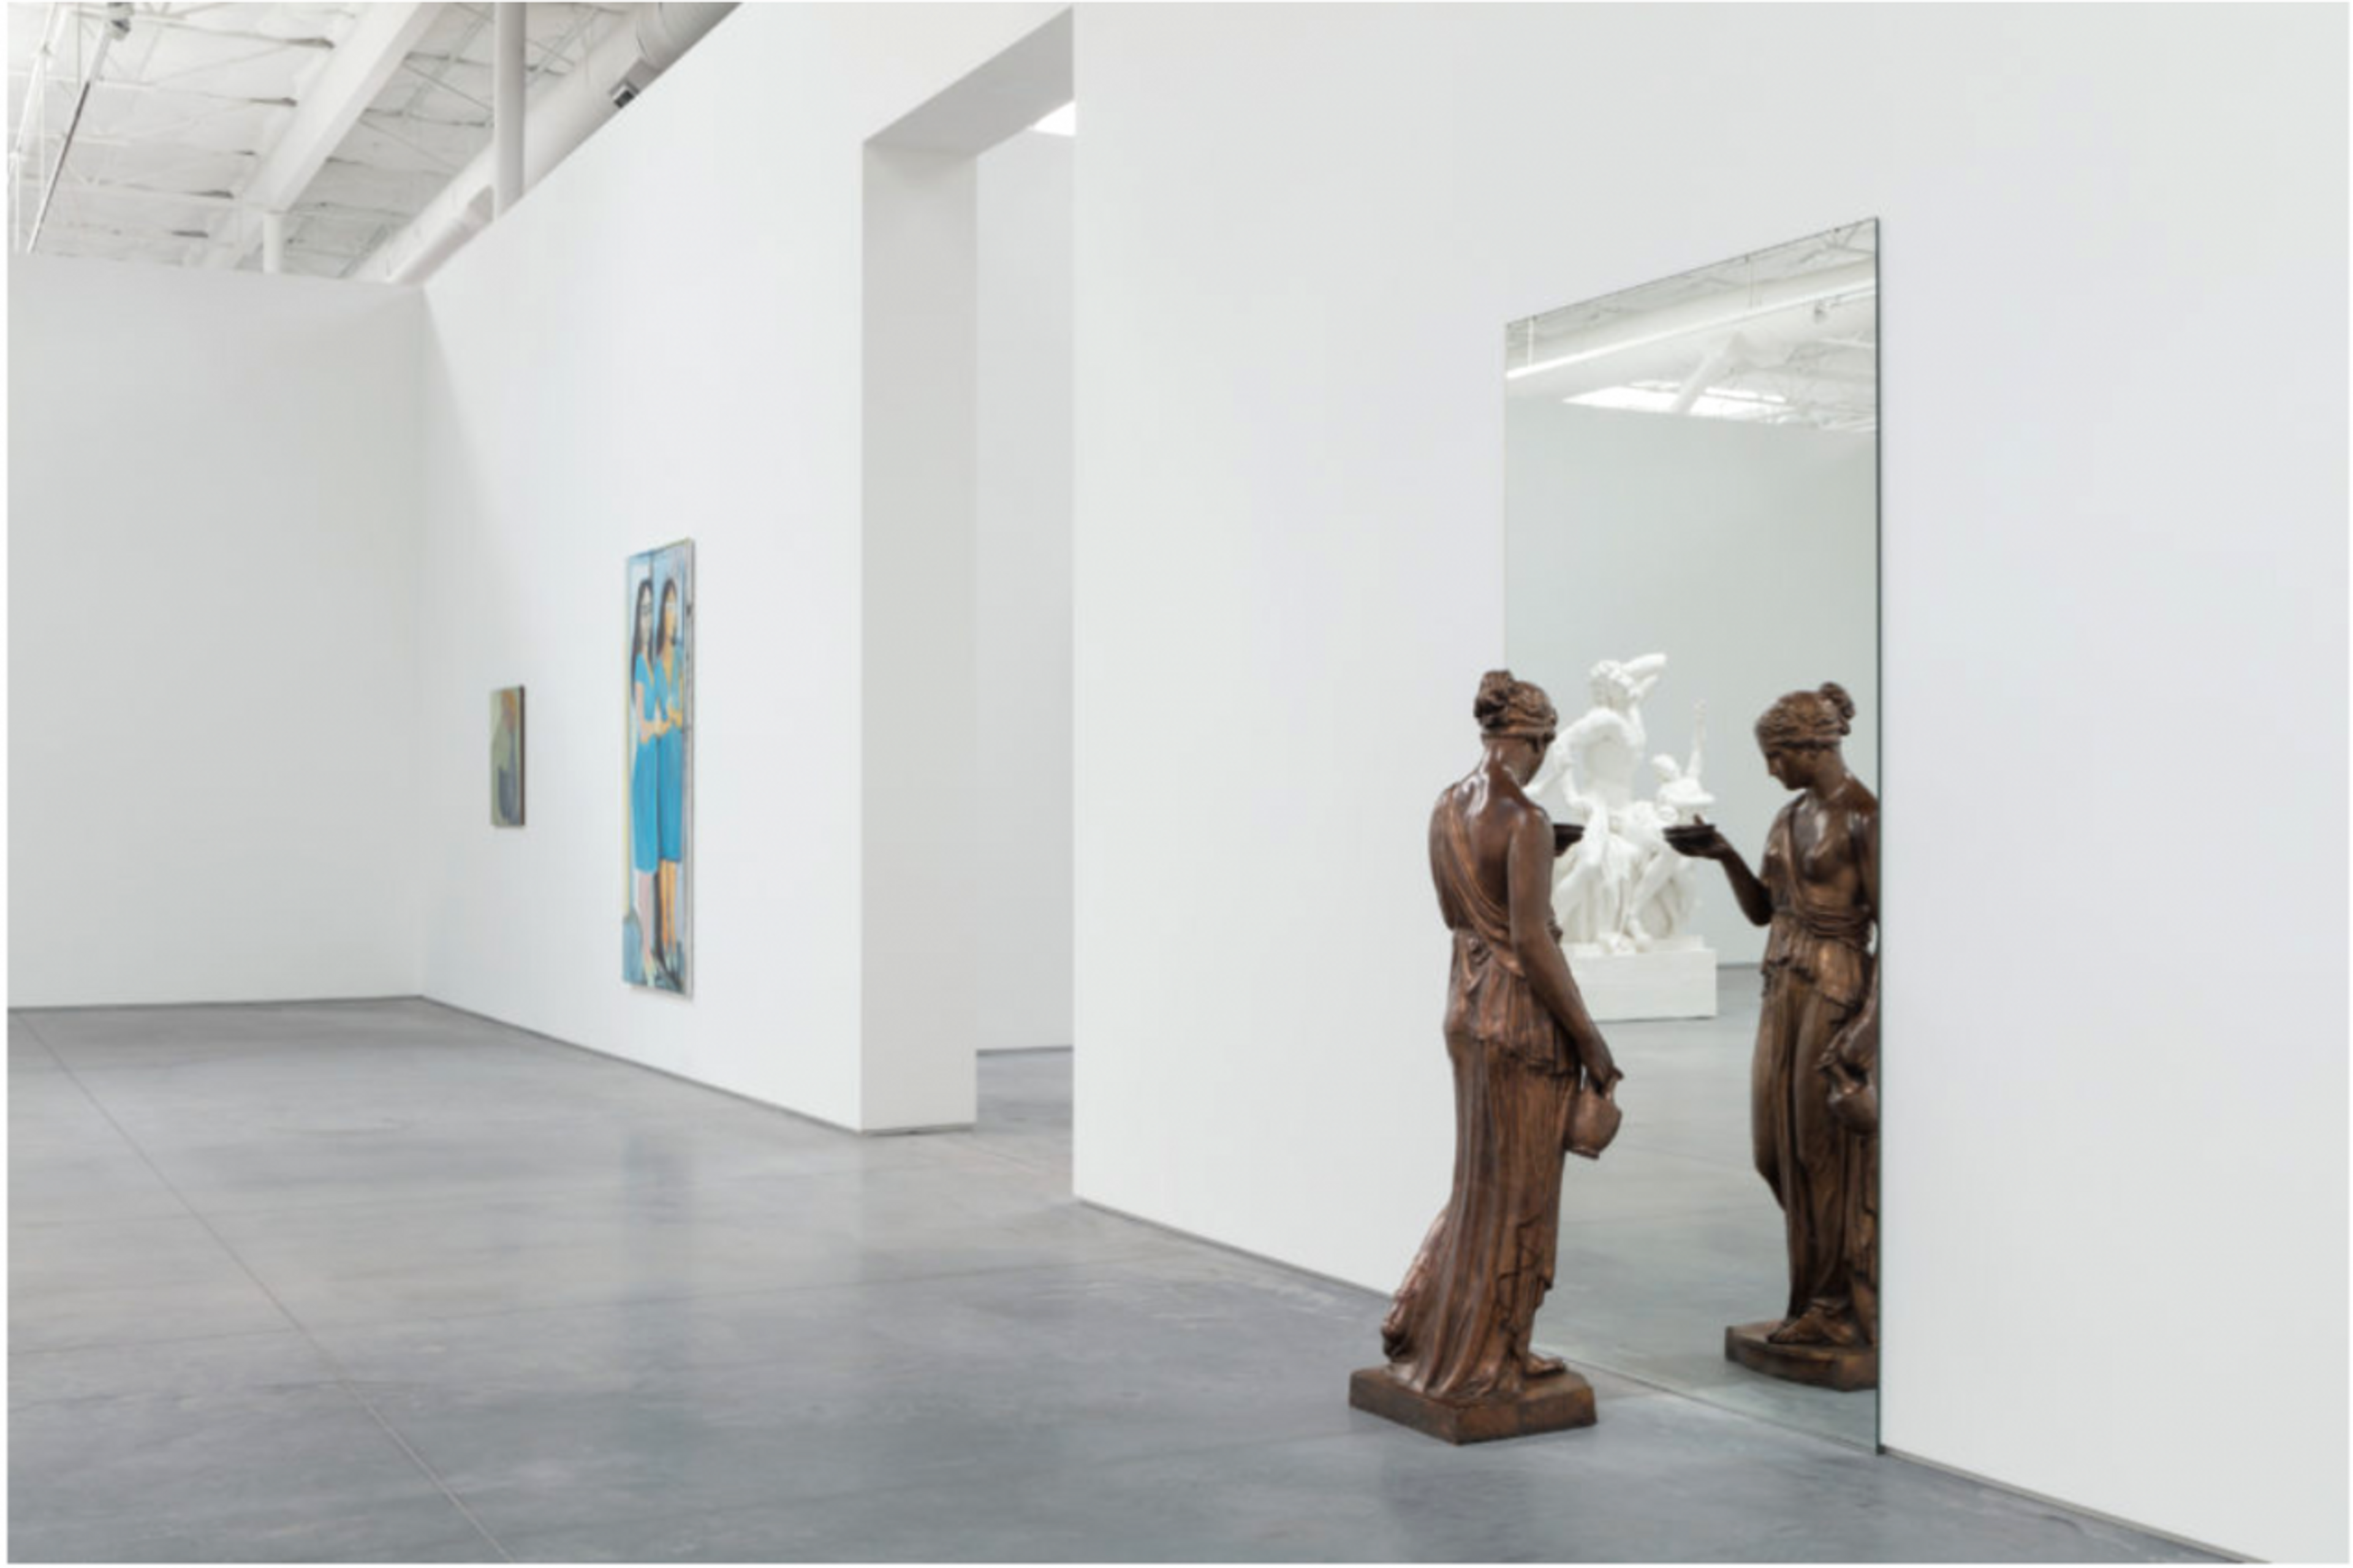 &quot; DOUBLES, DOBROS, PLIEGUES, PARES, TWINS, MITADES &quot;  (2017), installation view with works by Kai Althoff, Marlene Dumas, and Michelangelo Pistoletto